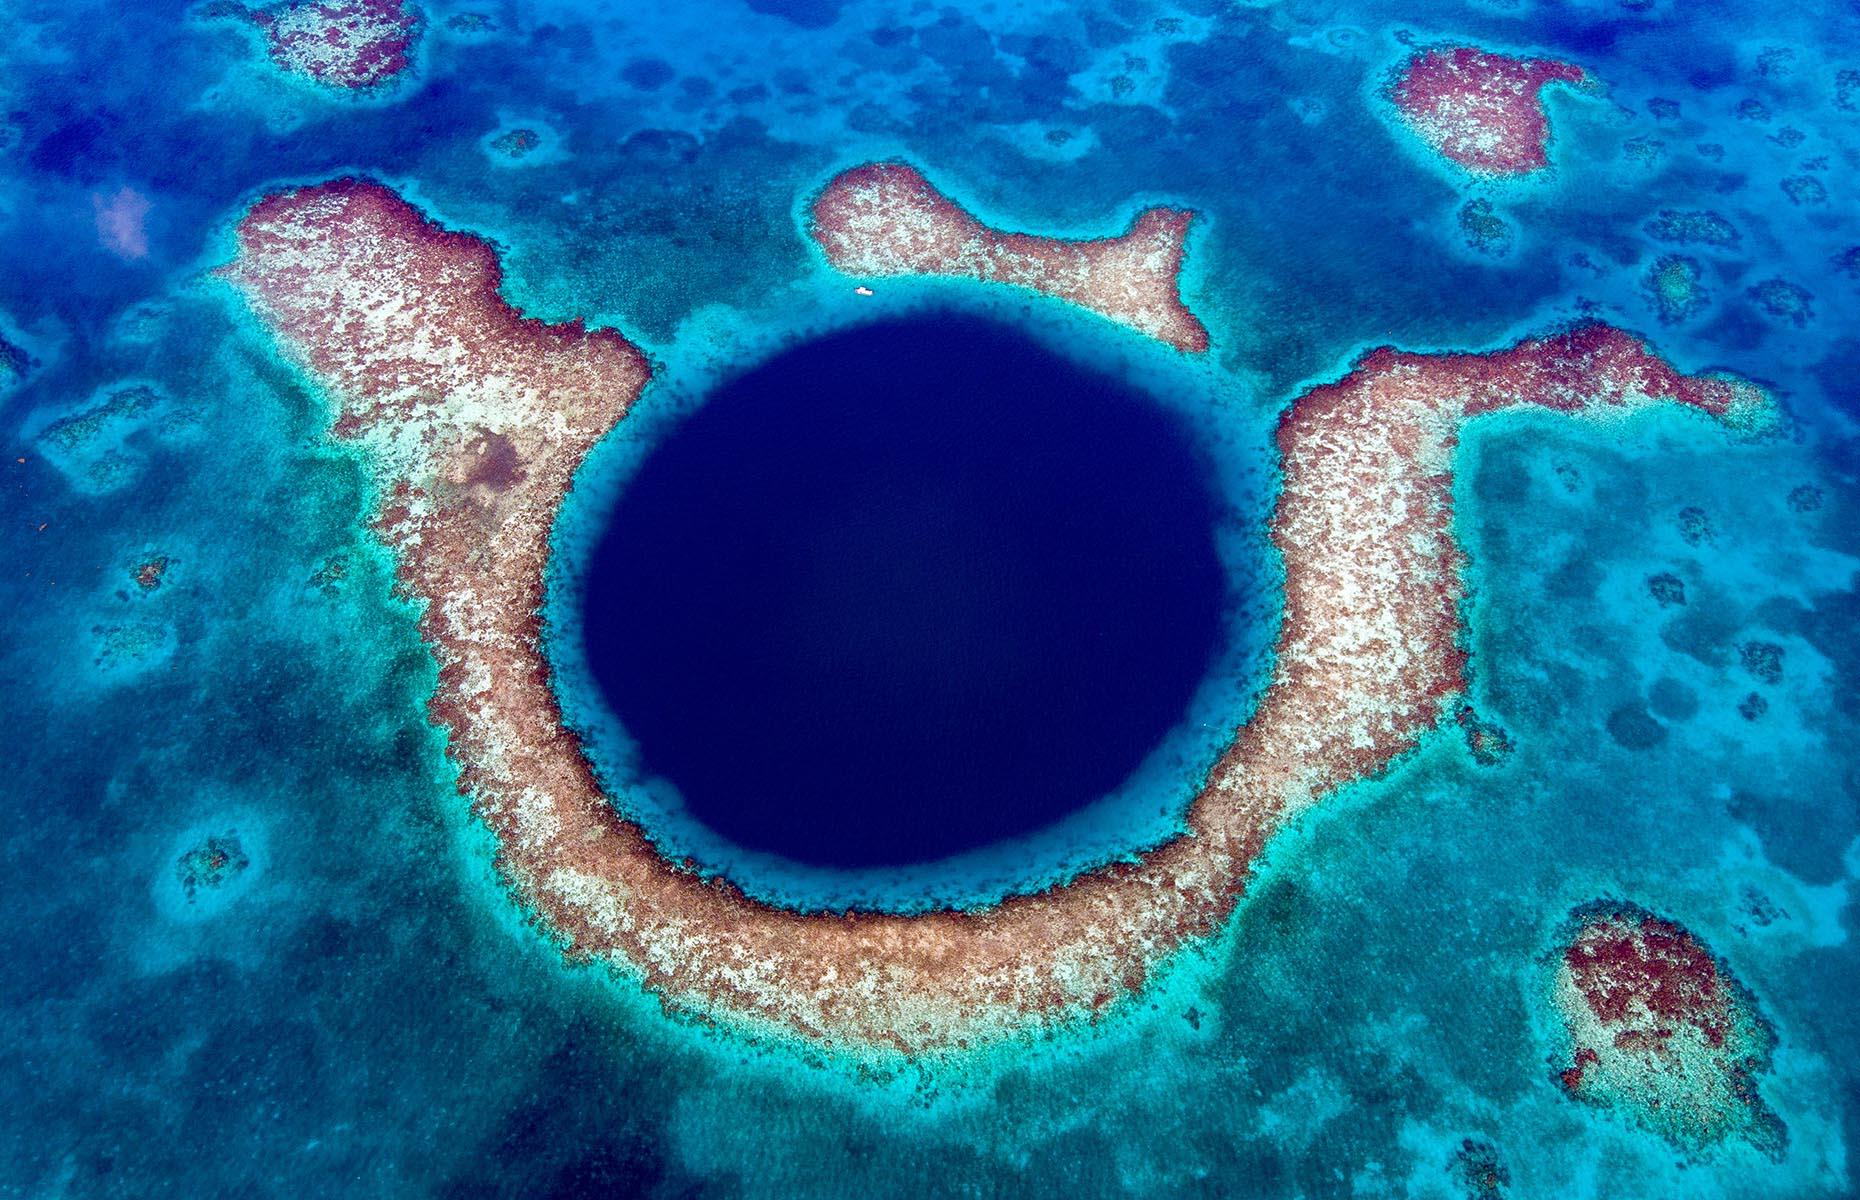 <p>By far Belize's best-known natural wonder, the Blue Hole has spent decades on the front covers of guide books, and remains one of the country's main draws. A vast sinkhole stamped like an inkblot on the ocean, it's more than 1,000 feet across and resides in the middle of Lighthouse Reef, roughly 43 miles from the mainland. It's almost <em>too</em> big and <em>too</em> blue – the colorful fish and vibrant corals tend to stop at the perimeter, and from down on the water it's hard to get any sense of scale. We recommend taking a tourist flight above the feature, which you can do in a helicopter or light aircraft.</p>